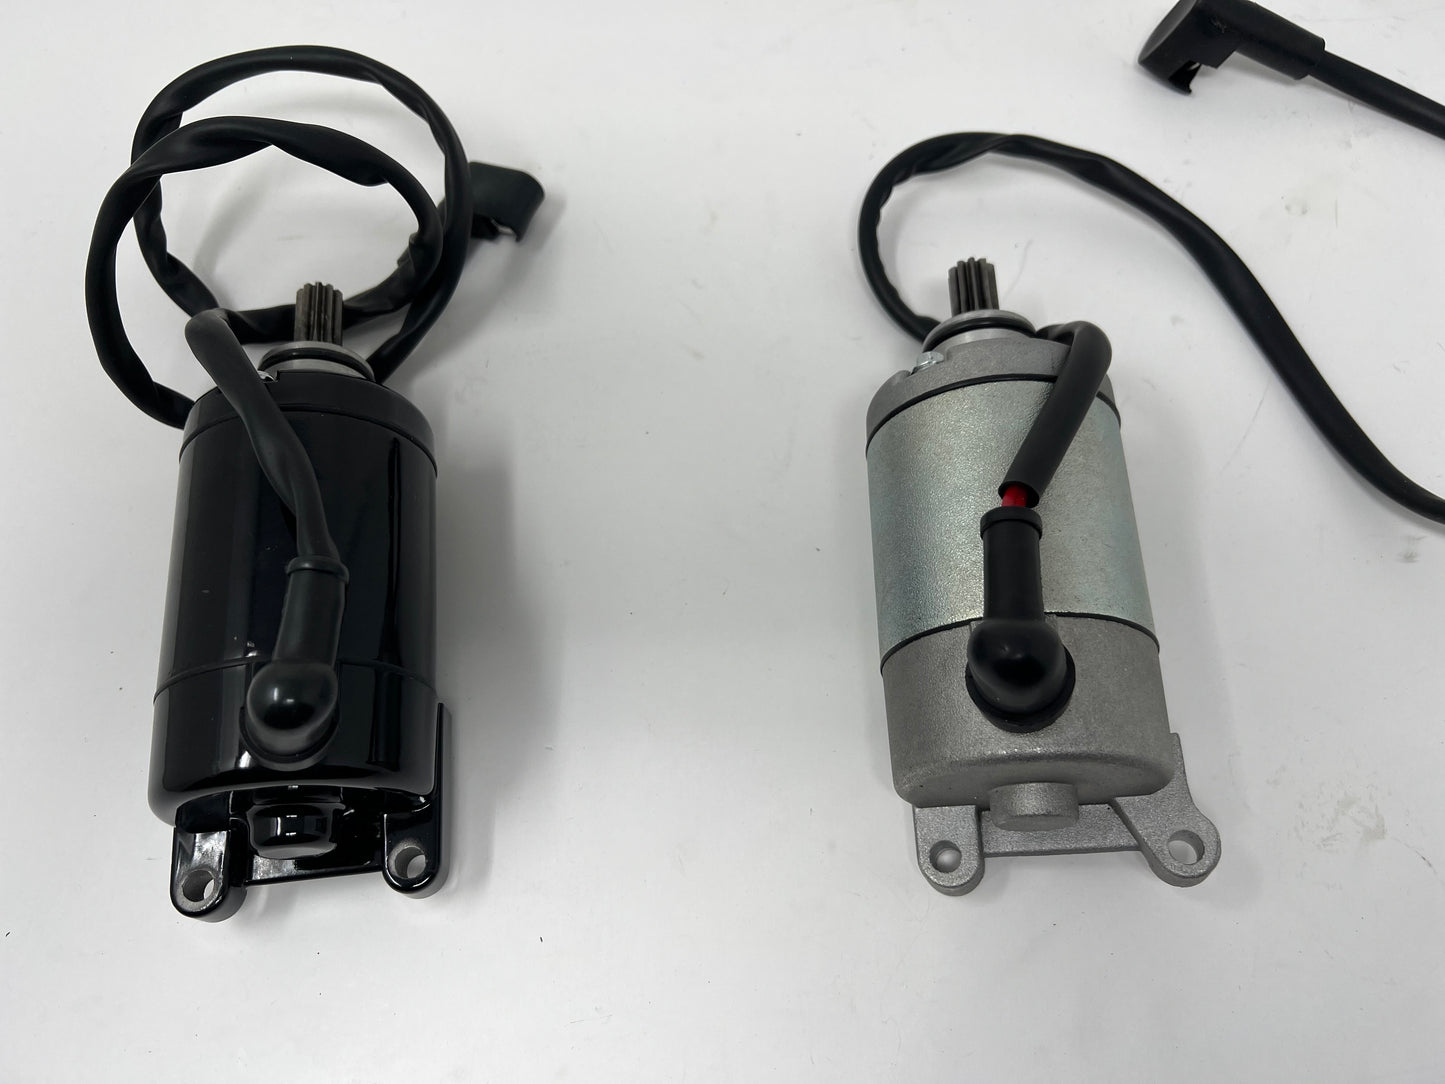 DF250RTS Starter motor part for sale. Starter for Veno mX22R RTS motorcycle parts.